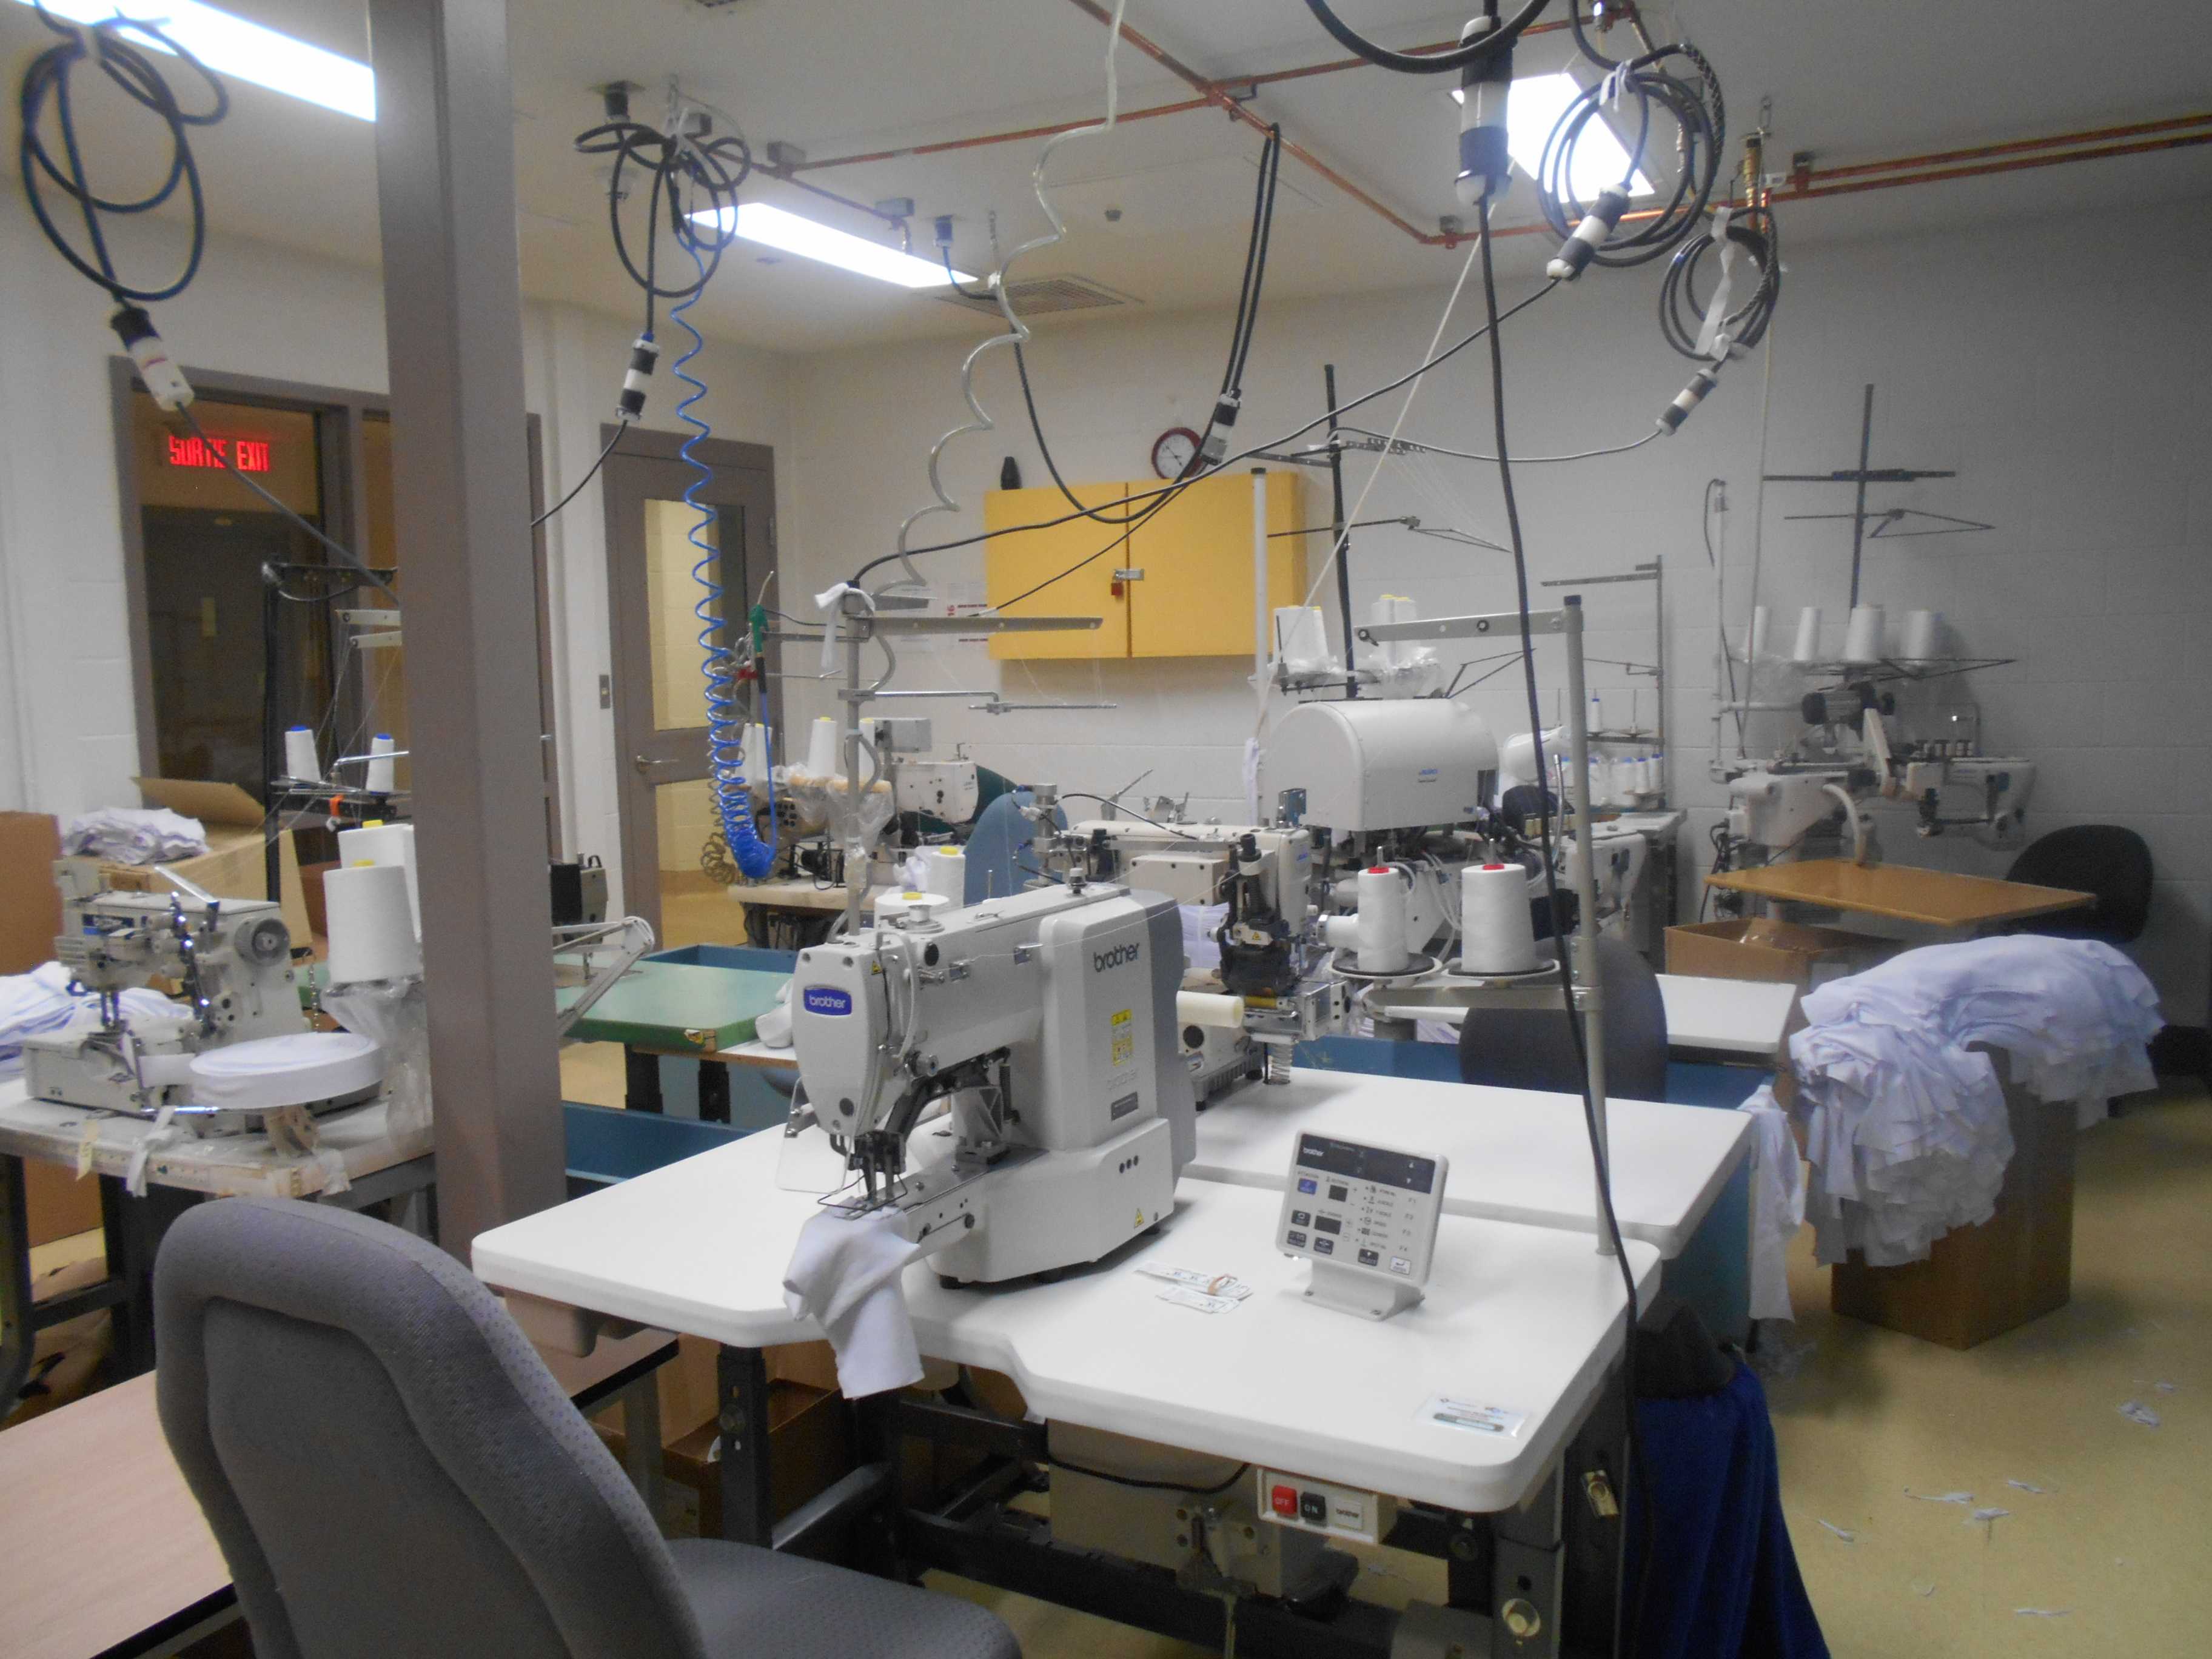 Photo of the vocational training space at Joliette Institution.